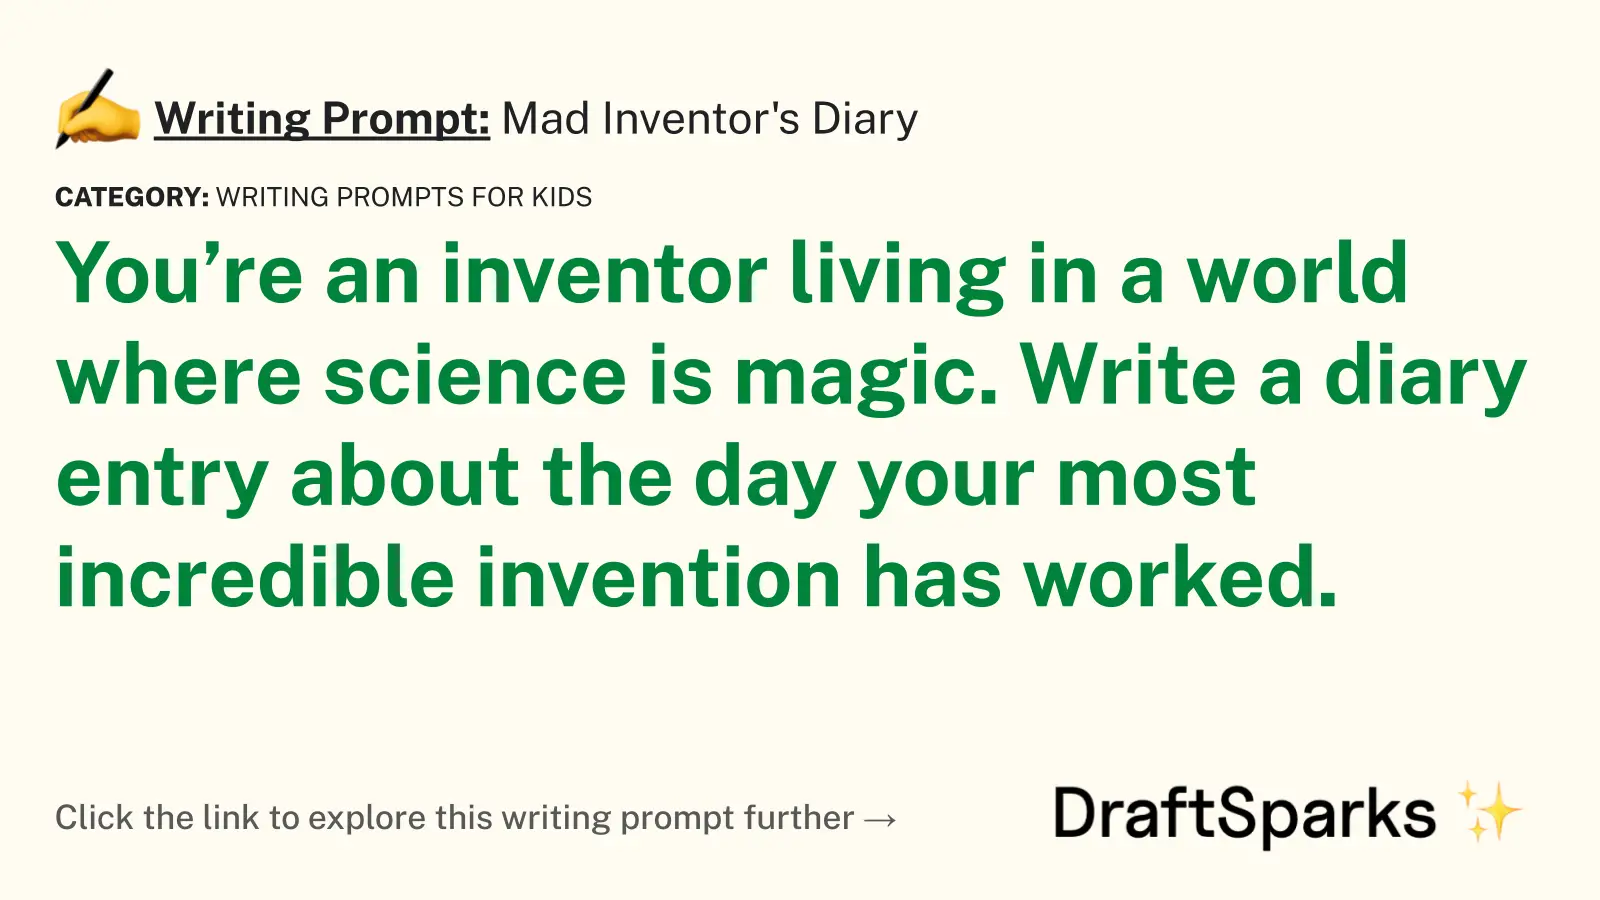 Mad Inventor’s Diary